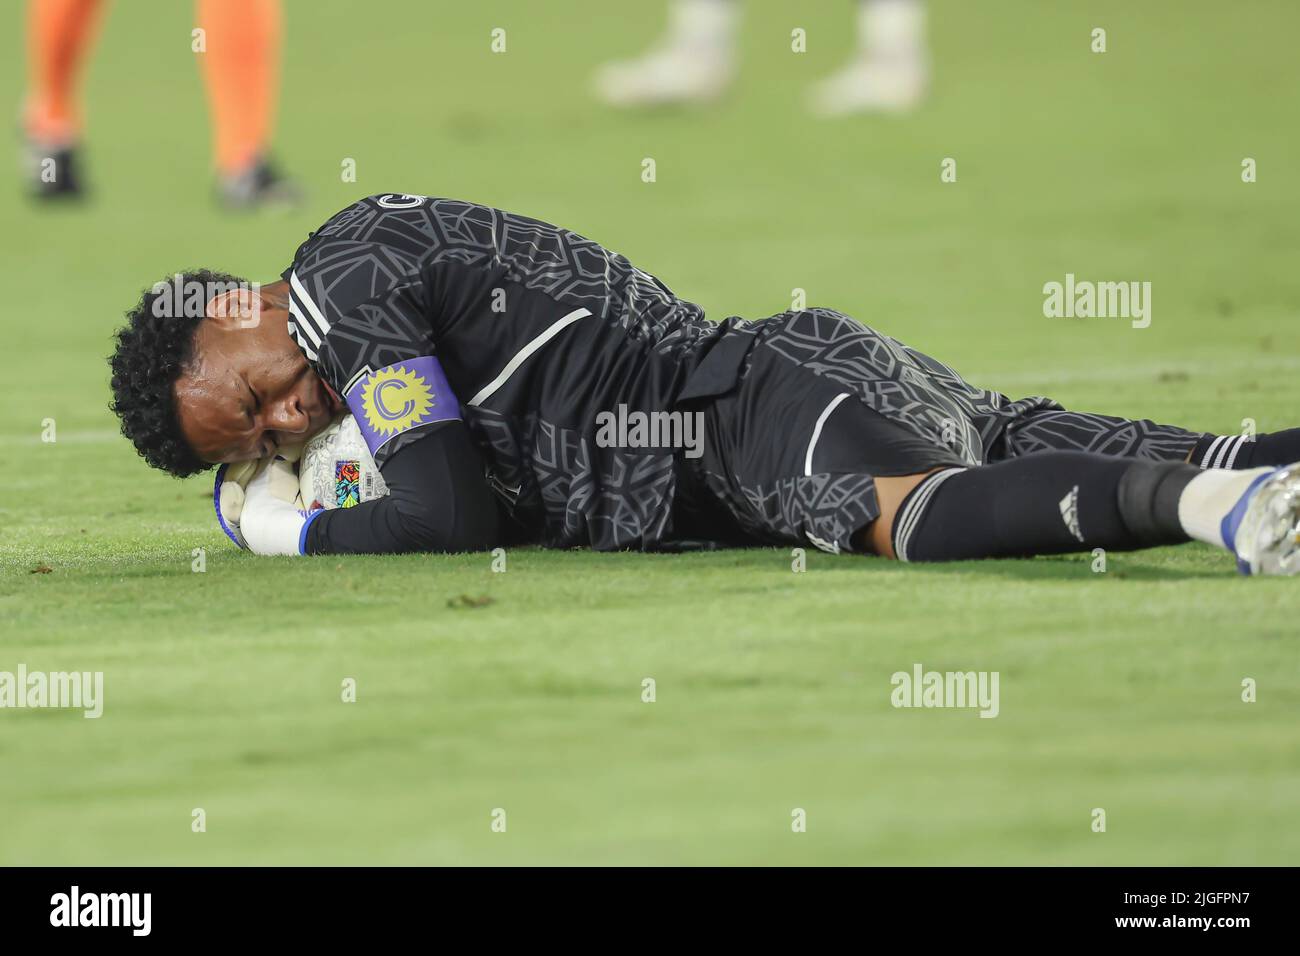 Orlando, FL:  Orlando City goalkeeper Pedro Gallese (1) came up with a big safe in the last seconds of the game which secured the win for the Lions du Stock Photo